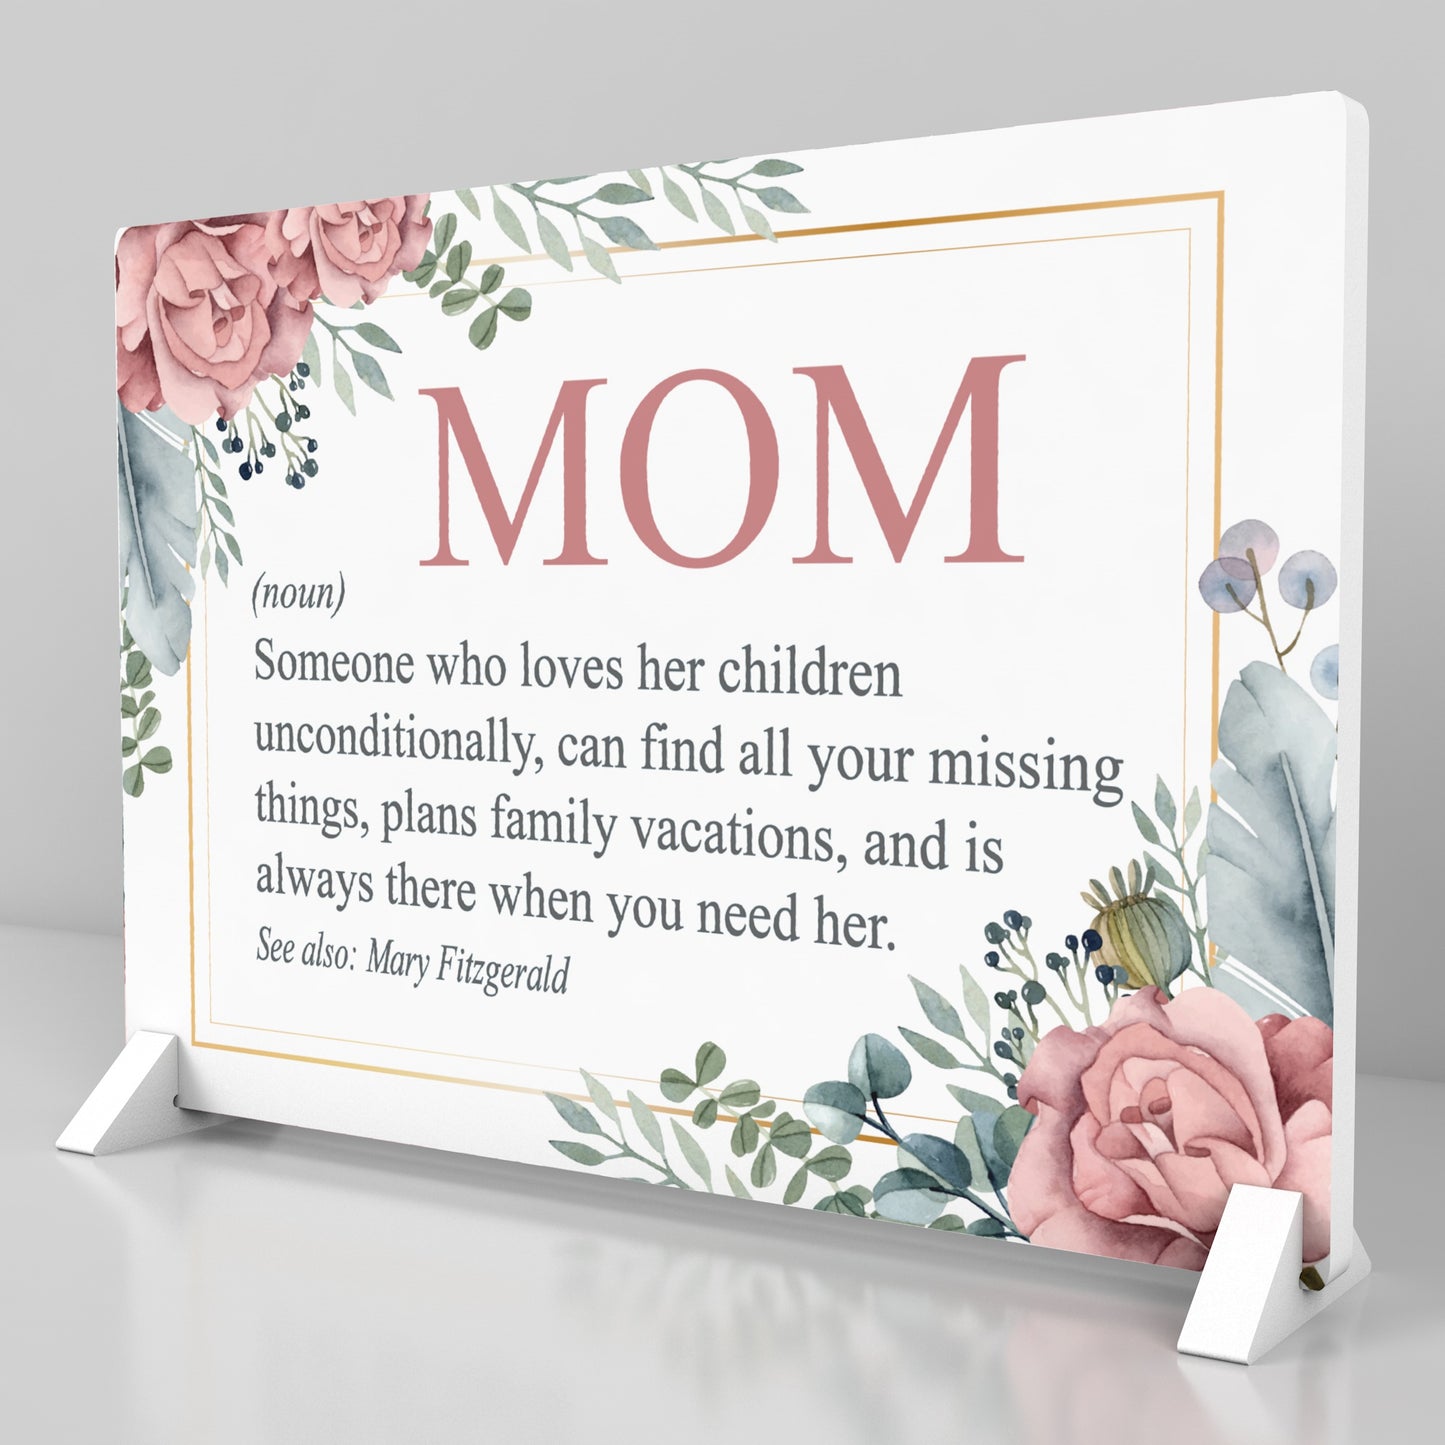 Personalized Mothers Day Gift - Gift Idea For Mom - Personalized Mom Sign for Home Decor